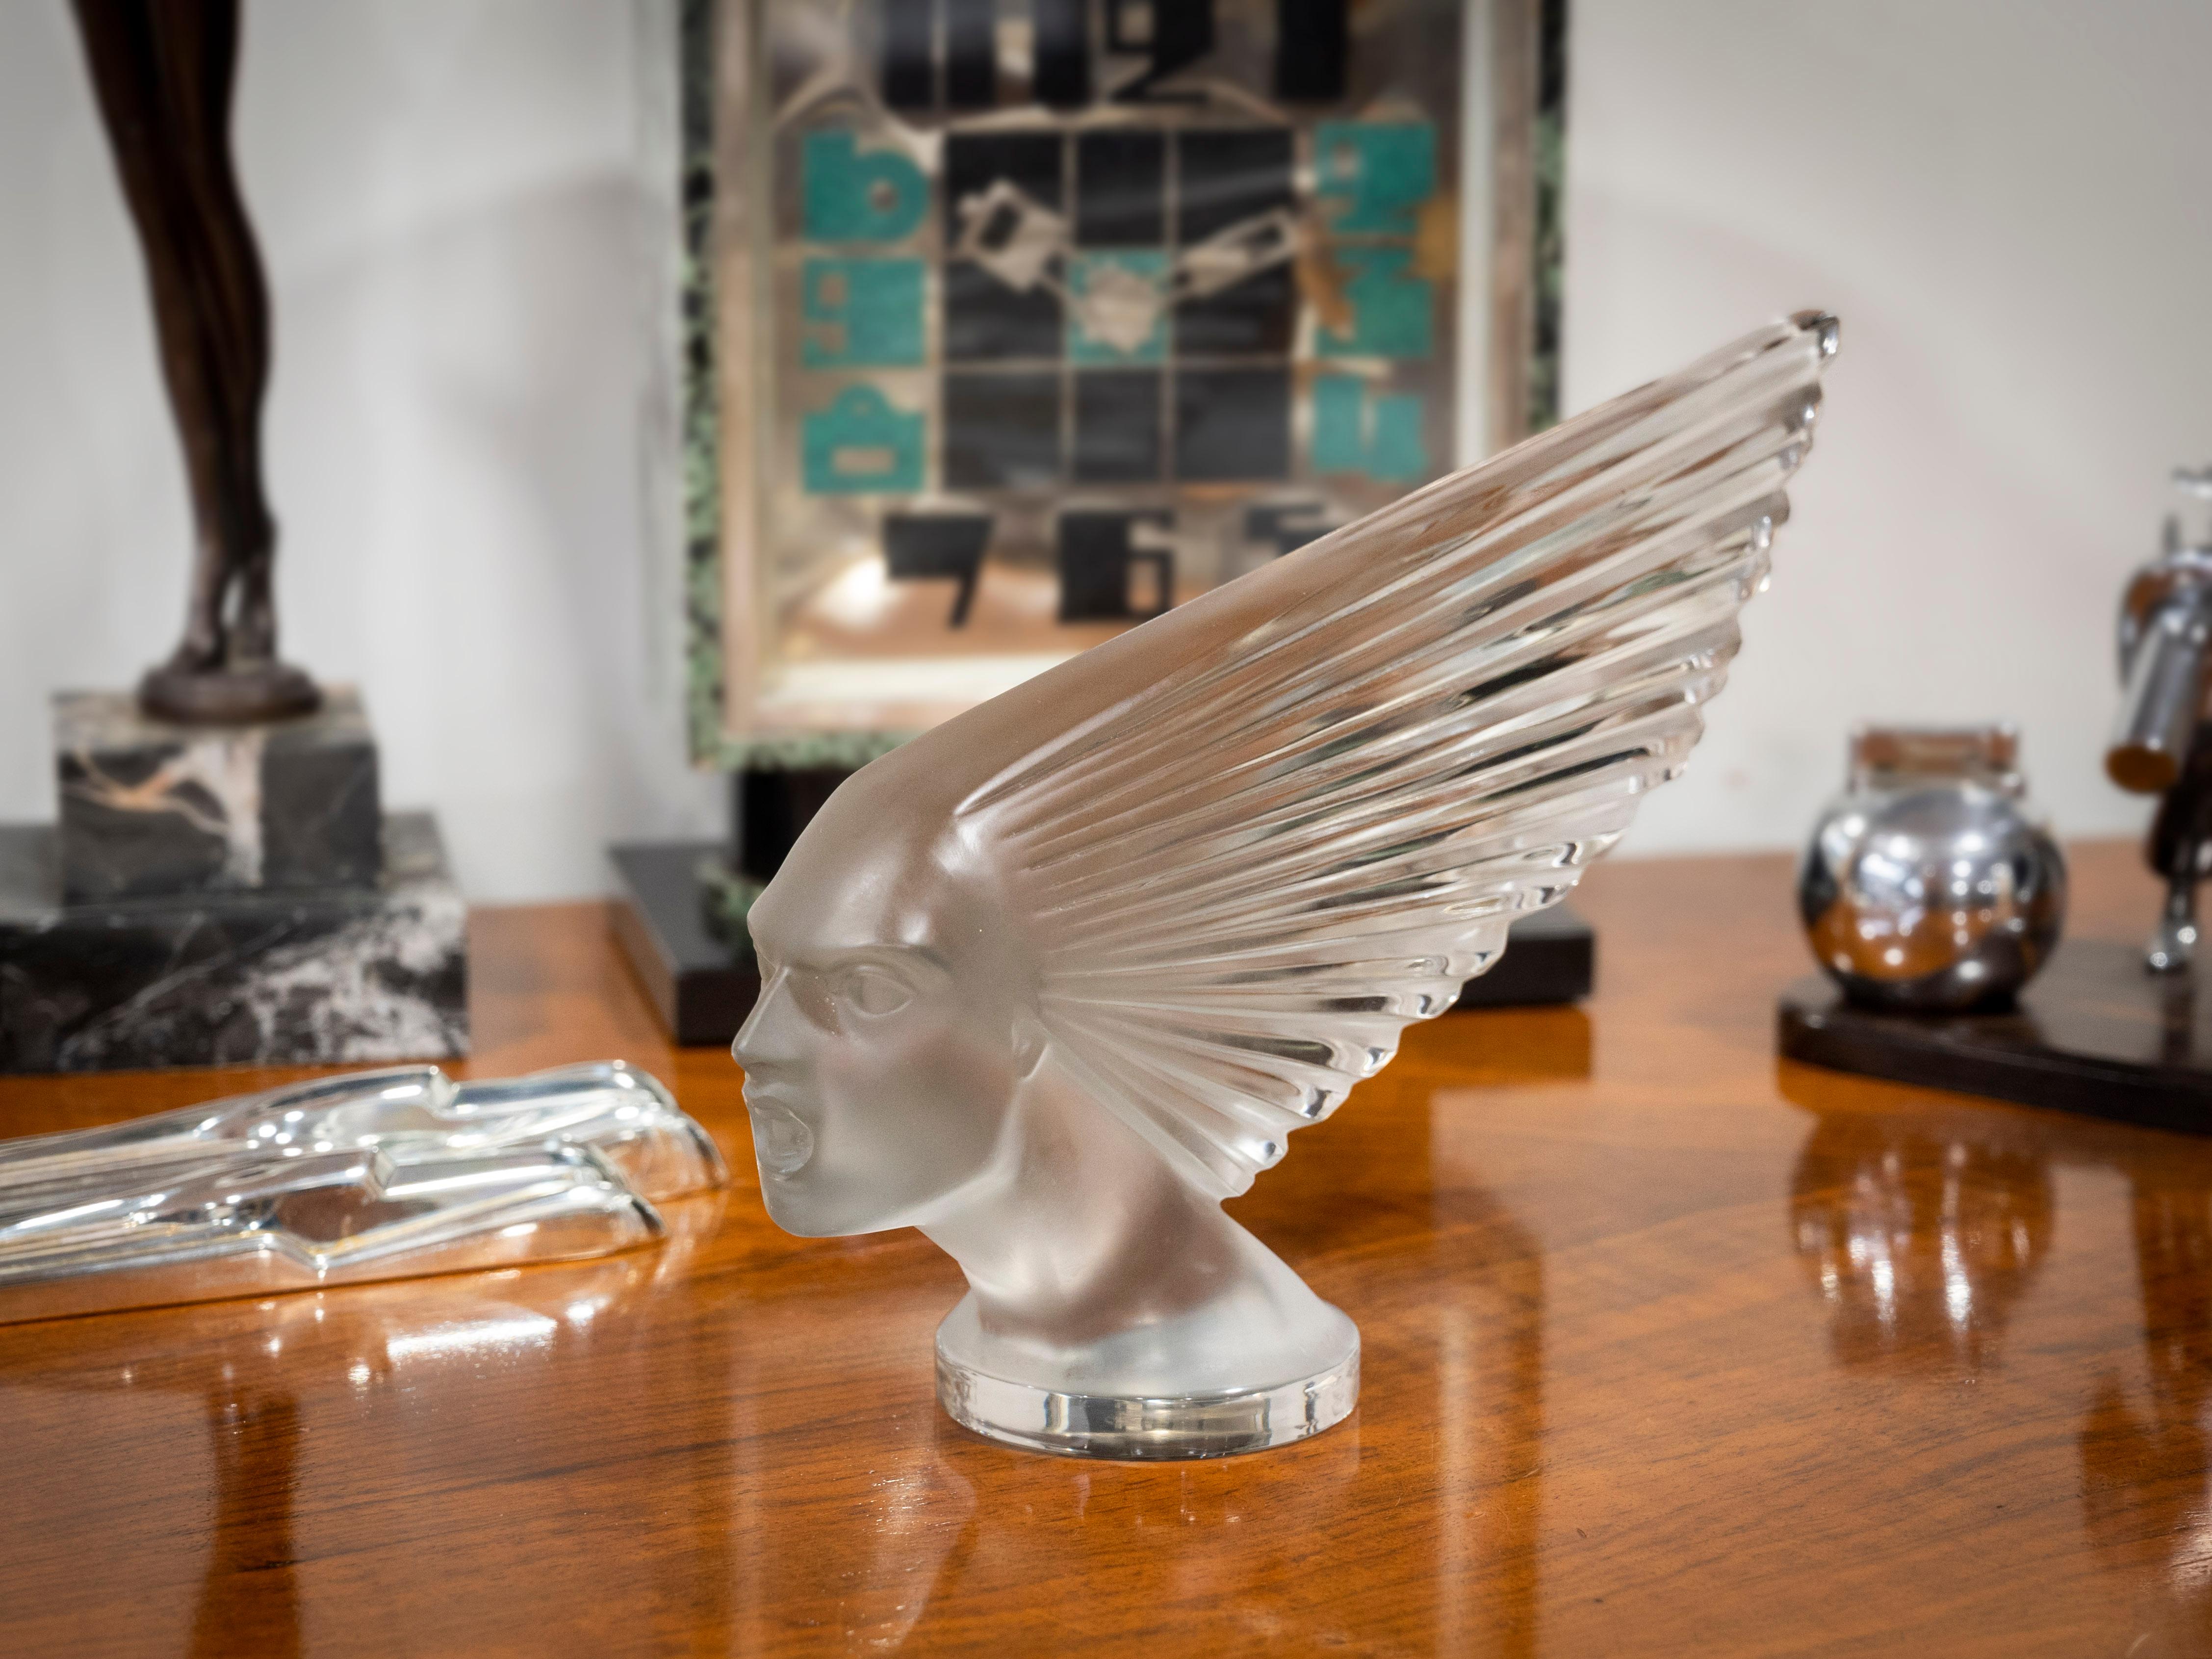 Original Rene Lalique Car Mascot

From our Lalique collection, we are thrilled to offer this original Rene Lalique Victoire Car Mascot. The Mascot from the original series by Rene Lalique modelled as a Victoire (spirit of the wind). The Car Mascot